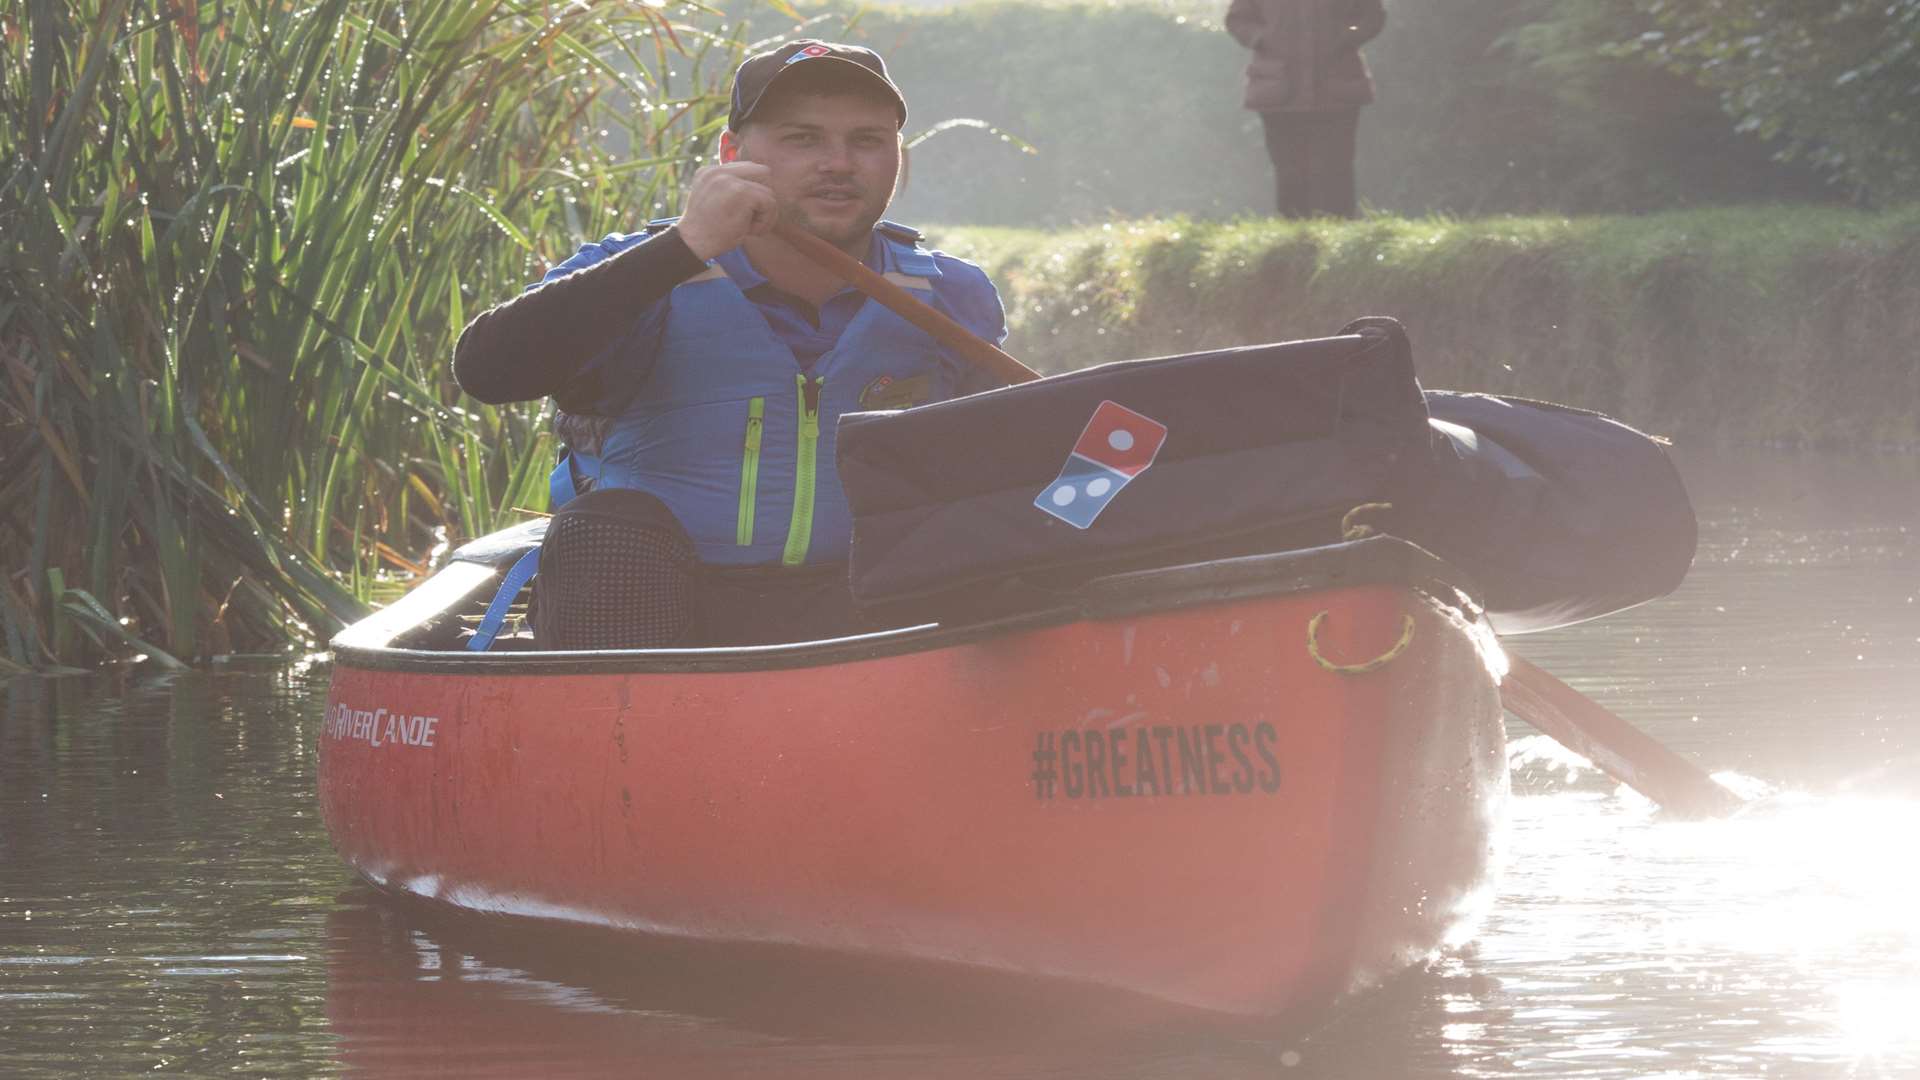 Pizza delivery 'buoy' gets a slice of the riverside action. Picture: Domino's Pizza